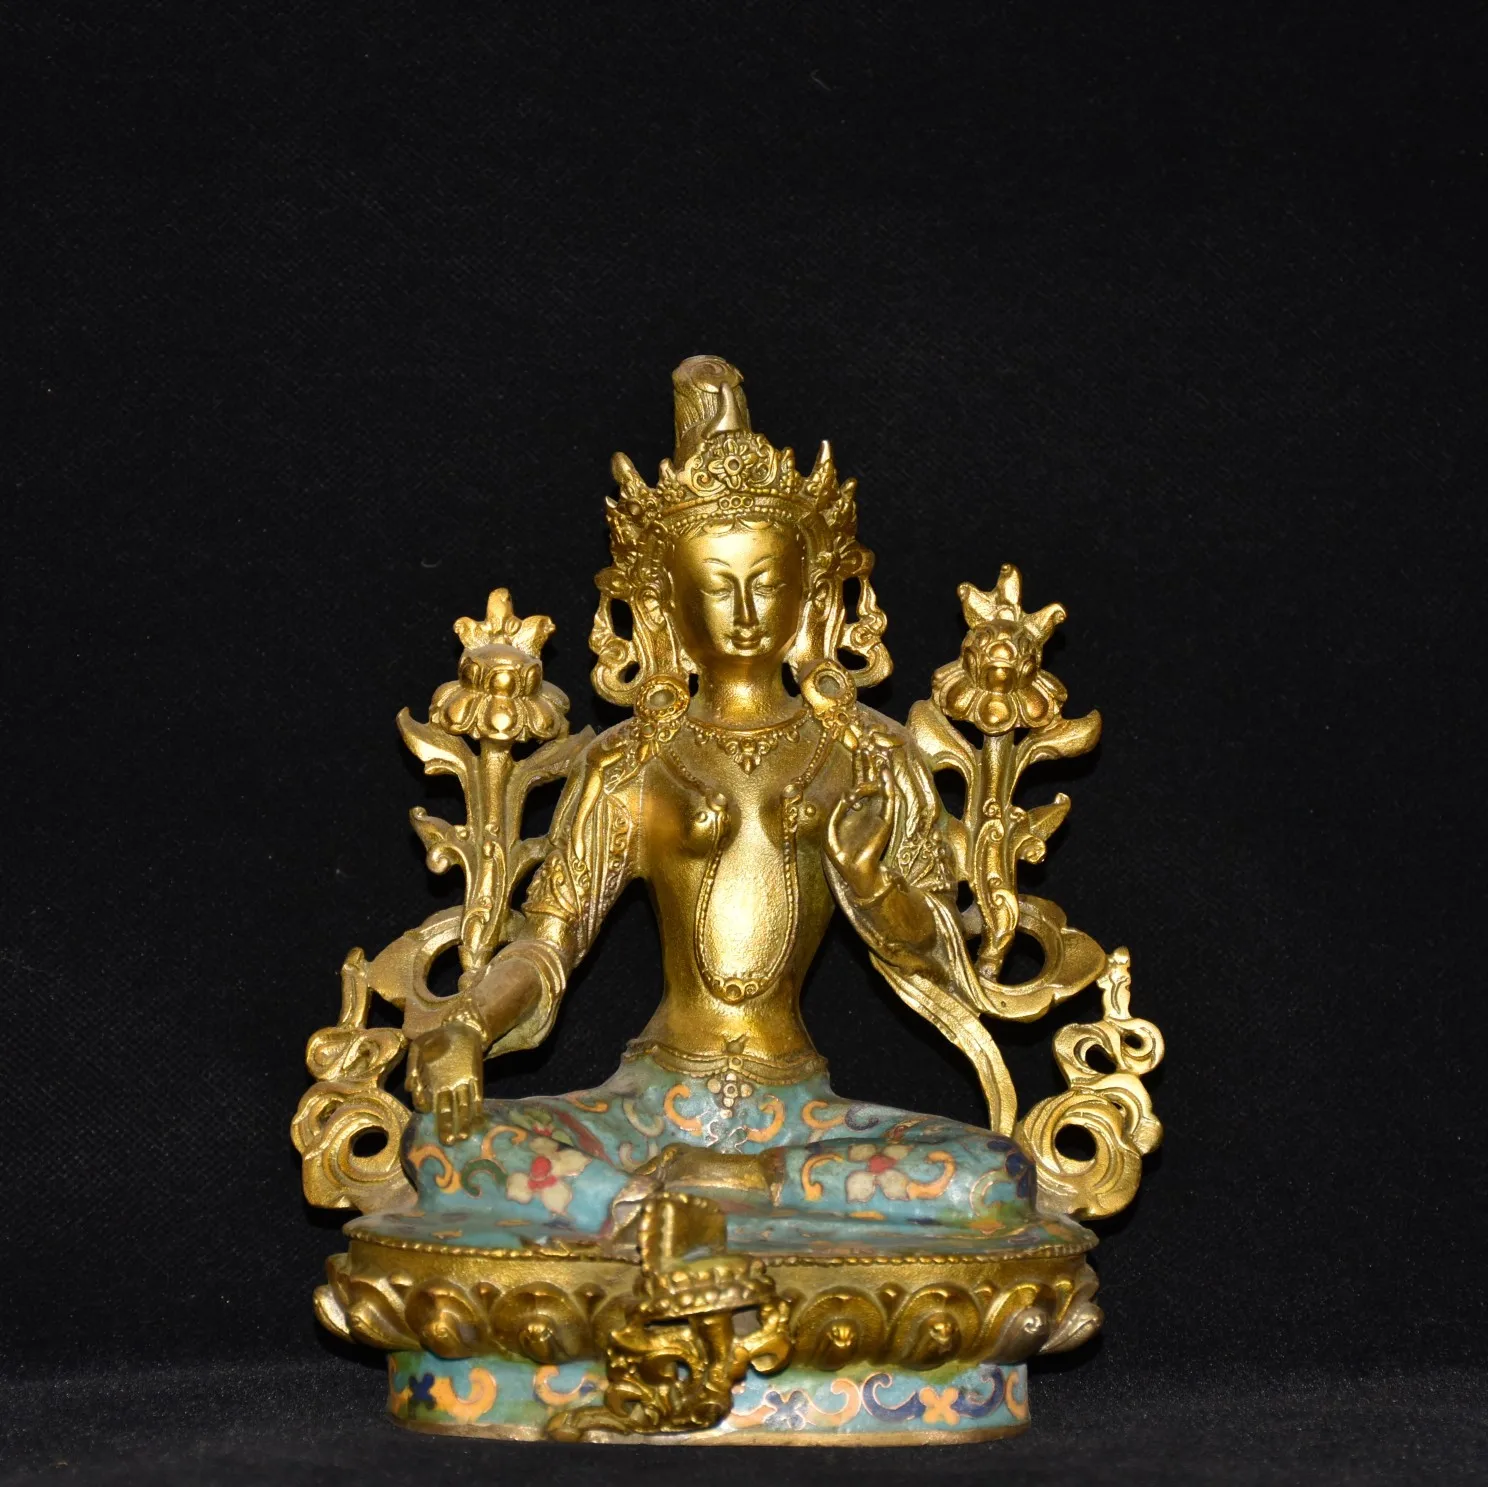 

Classic Pure Copper Painted Buddha Statues With Exquisite Craftsmanship and Beautiful Appearance are Worth Collecting